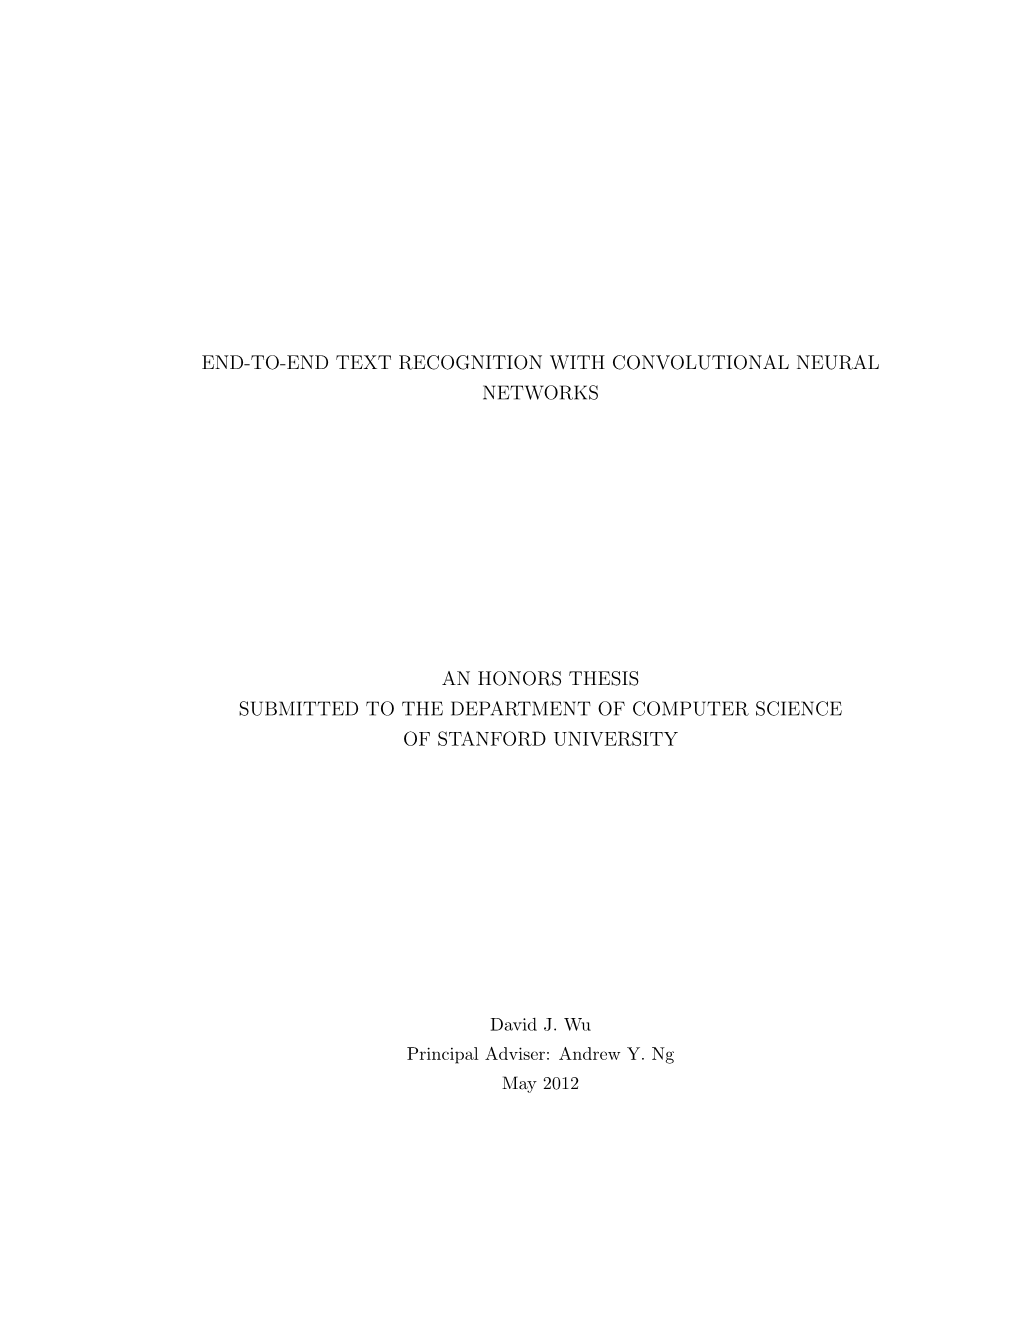 text recognition thesis